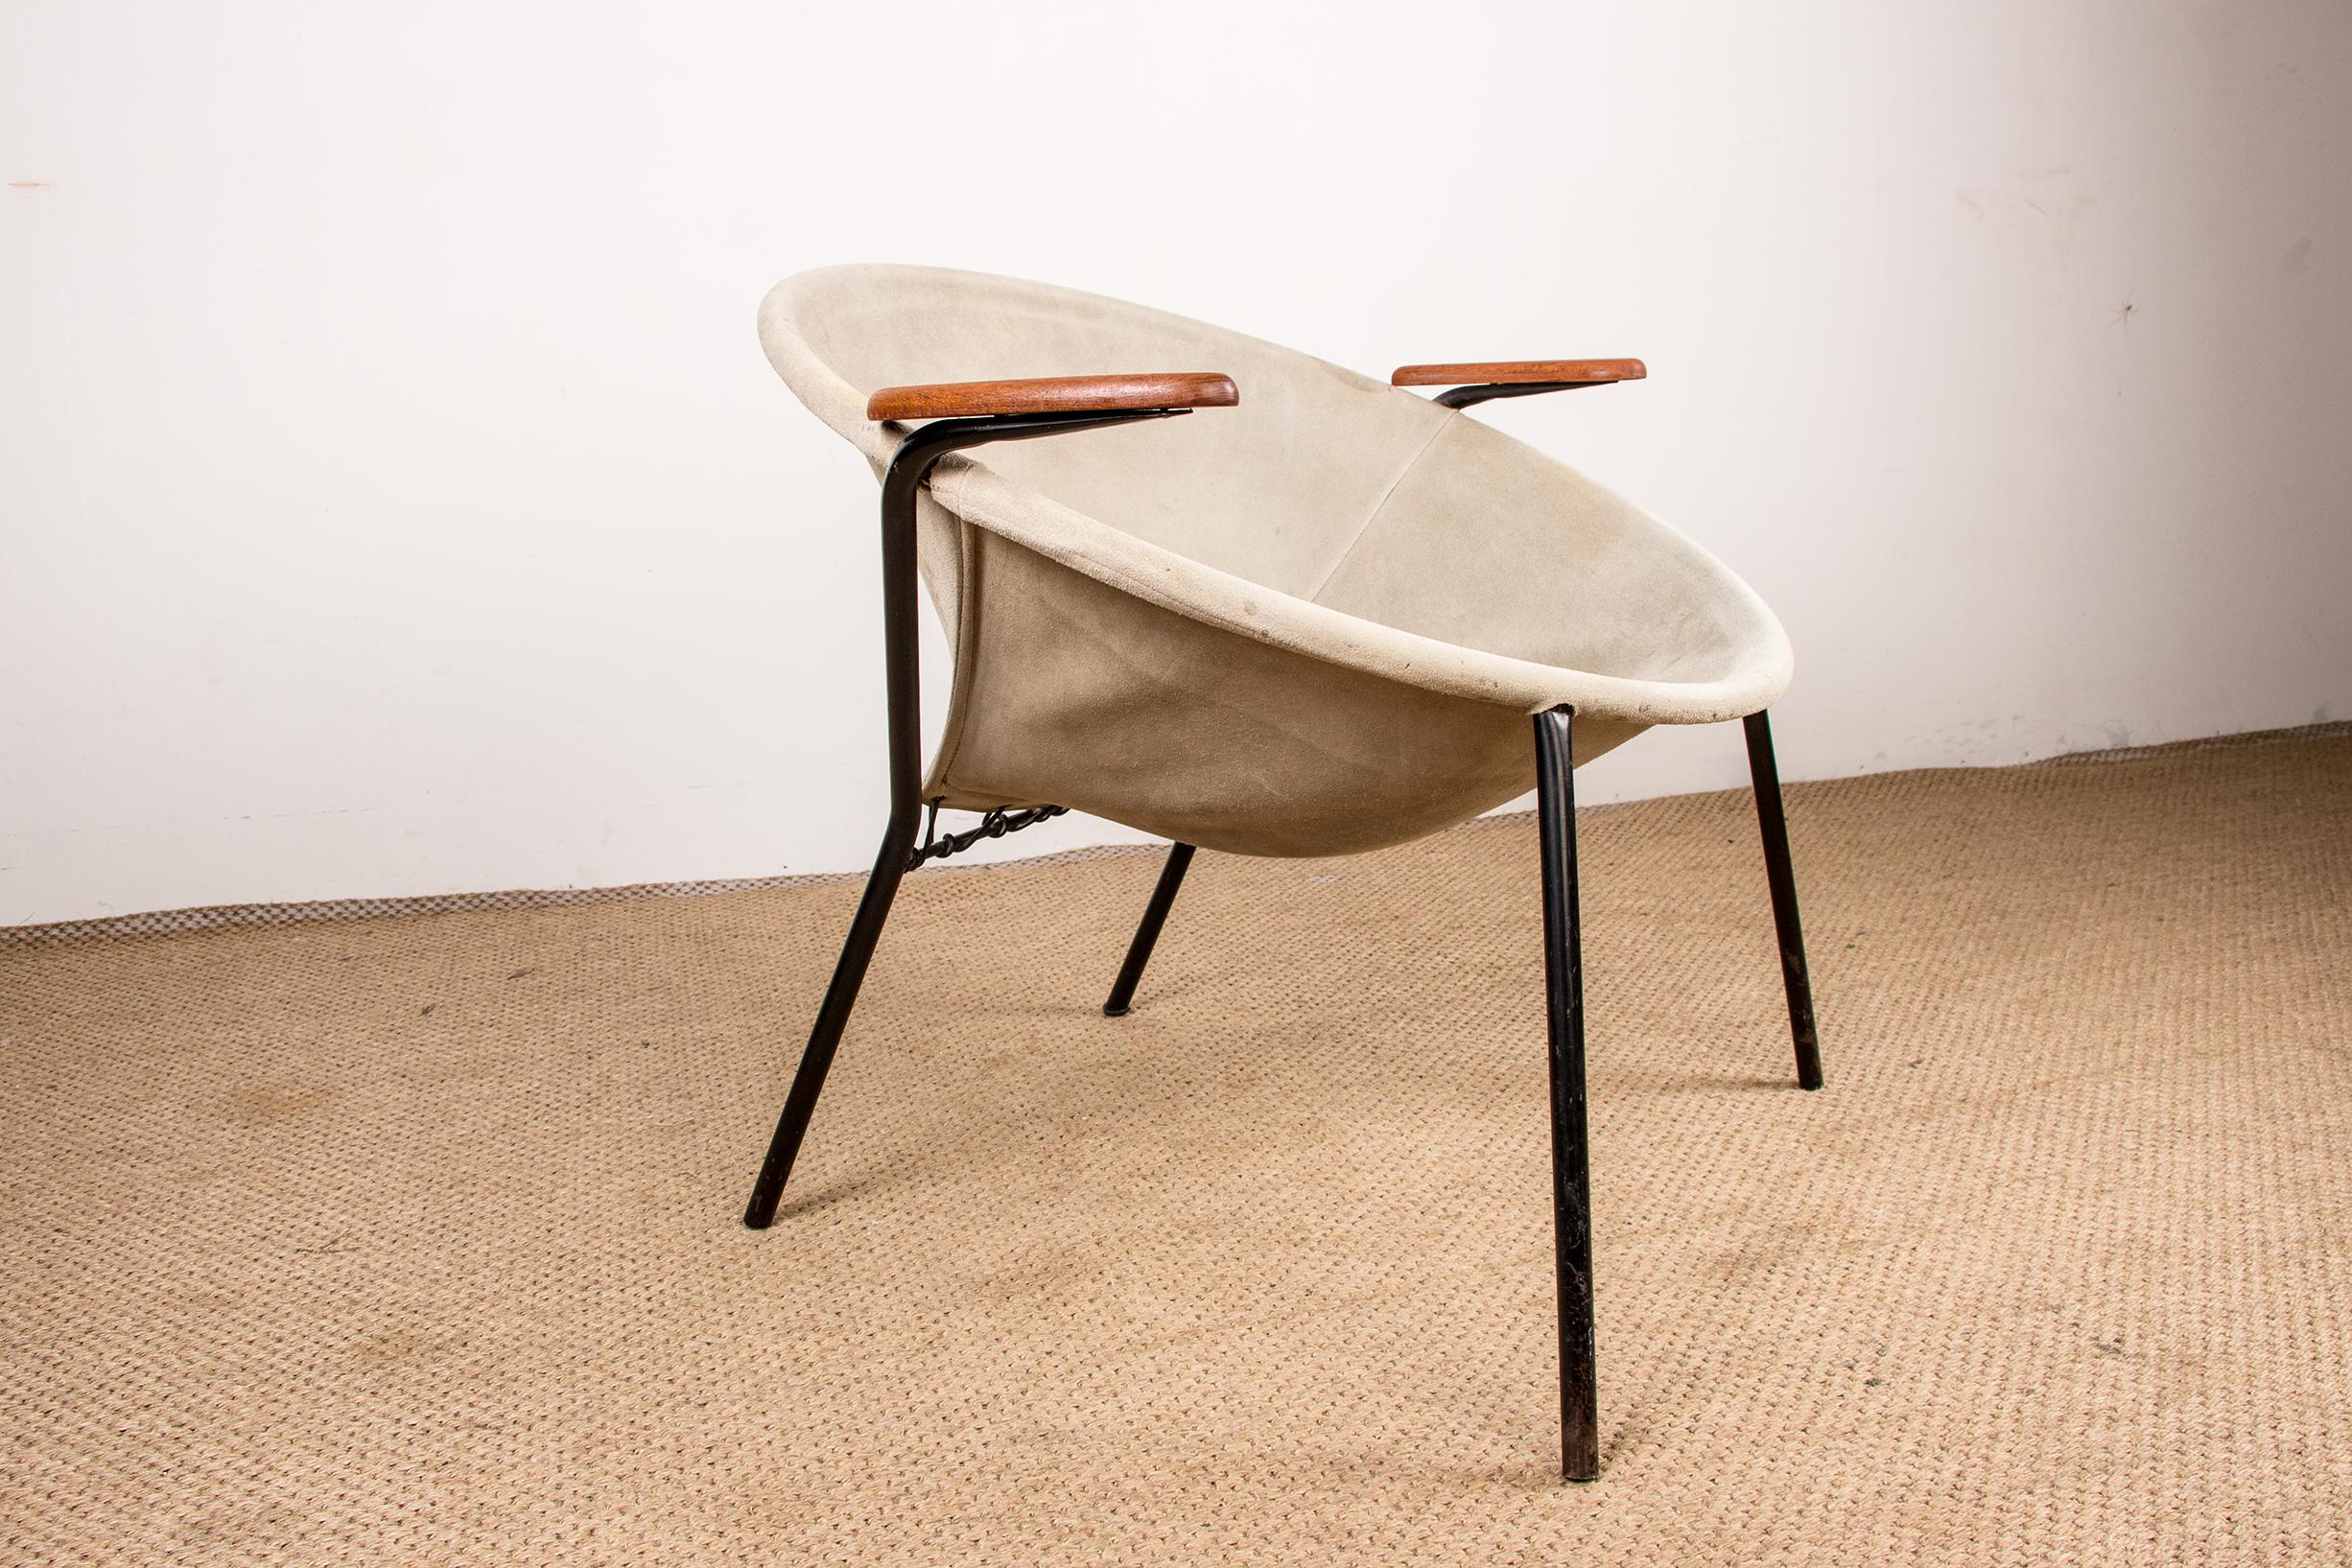 Mid-20th Century Danish Leather, Steel and Teak Armchair, Balloon Model by Hans Olsen 1960 For Sale